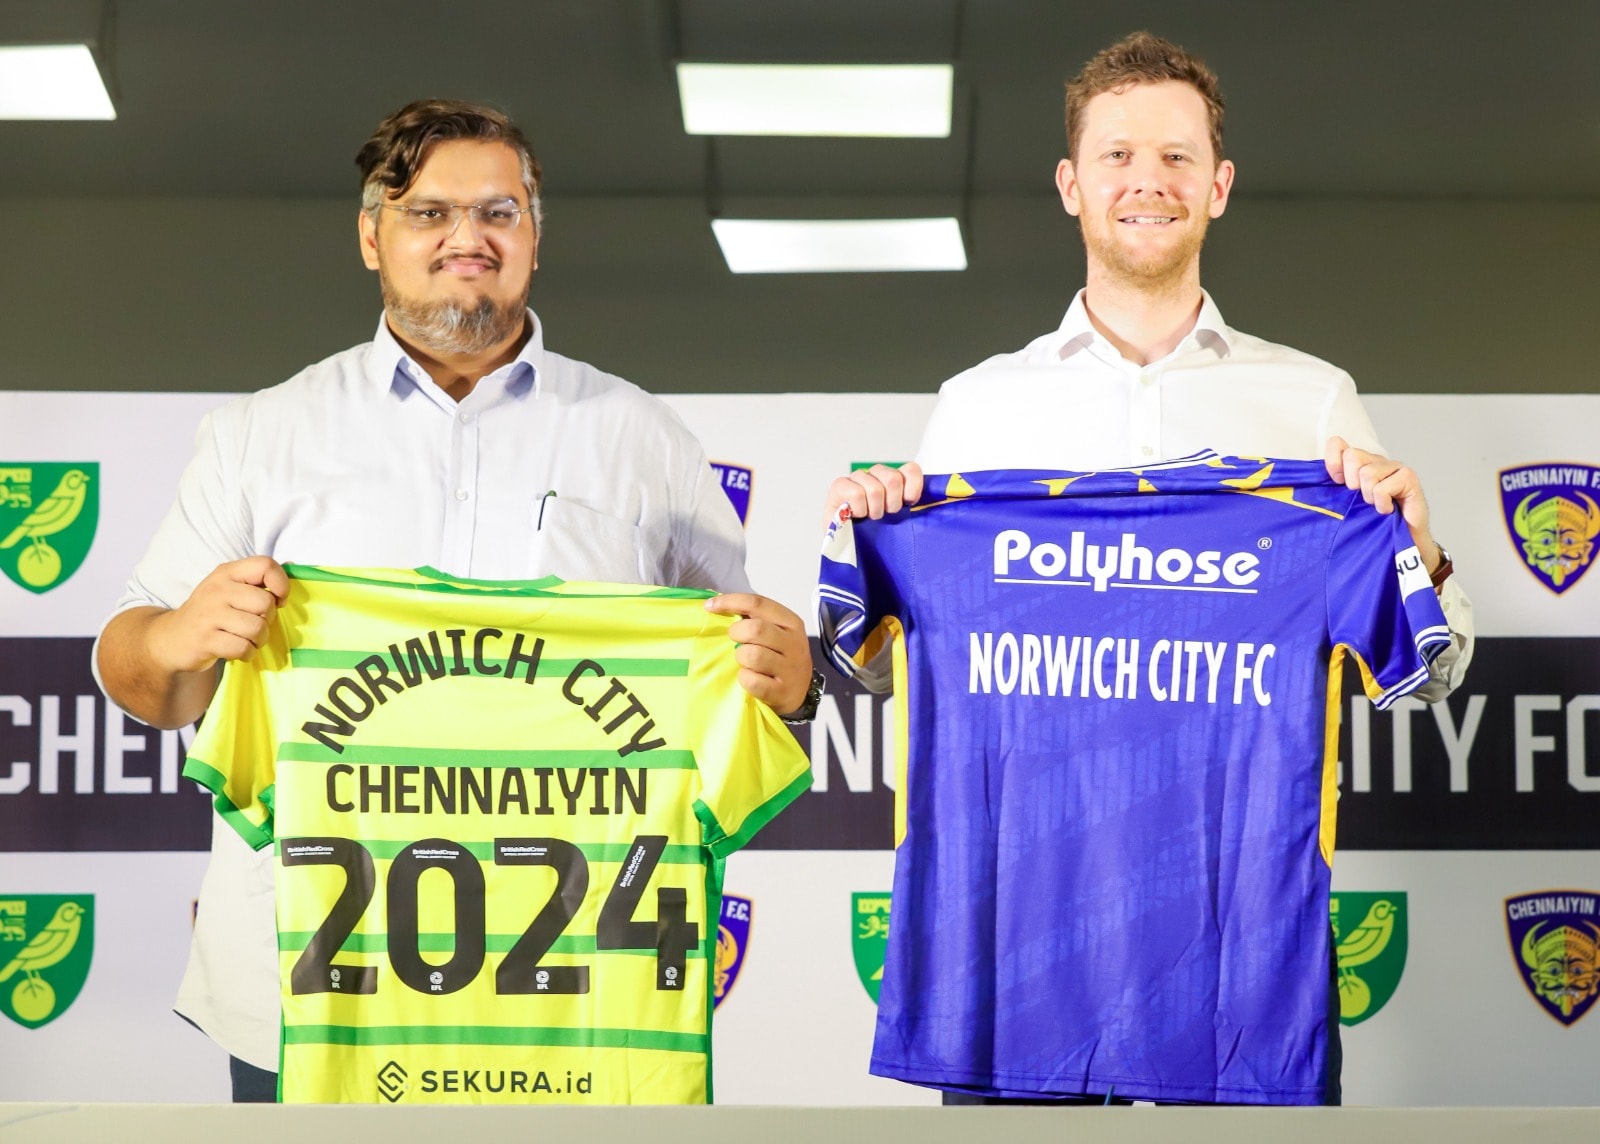 Chennaiyin FC And Norwich City FC Join Forces To Work On Grassroots